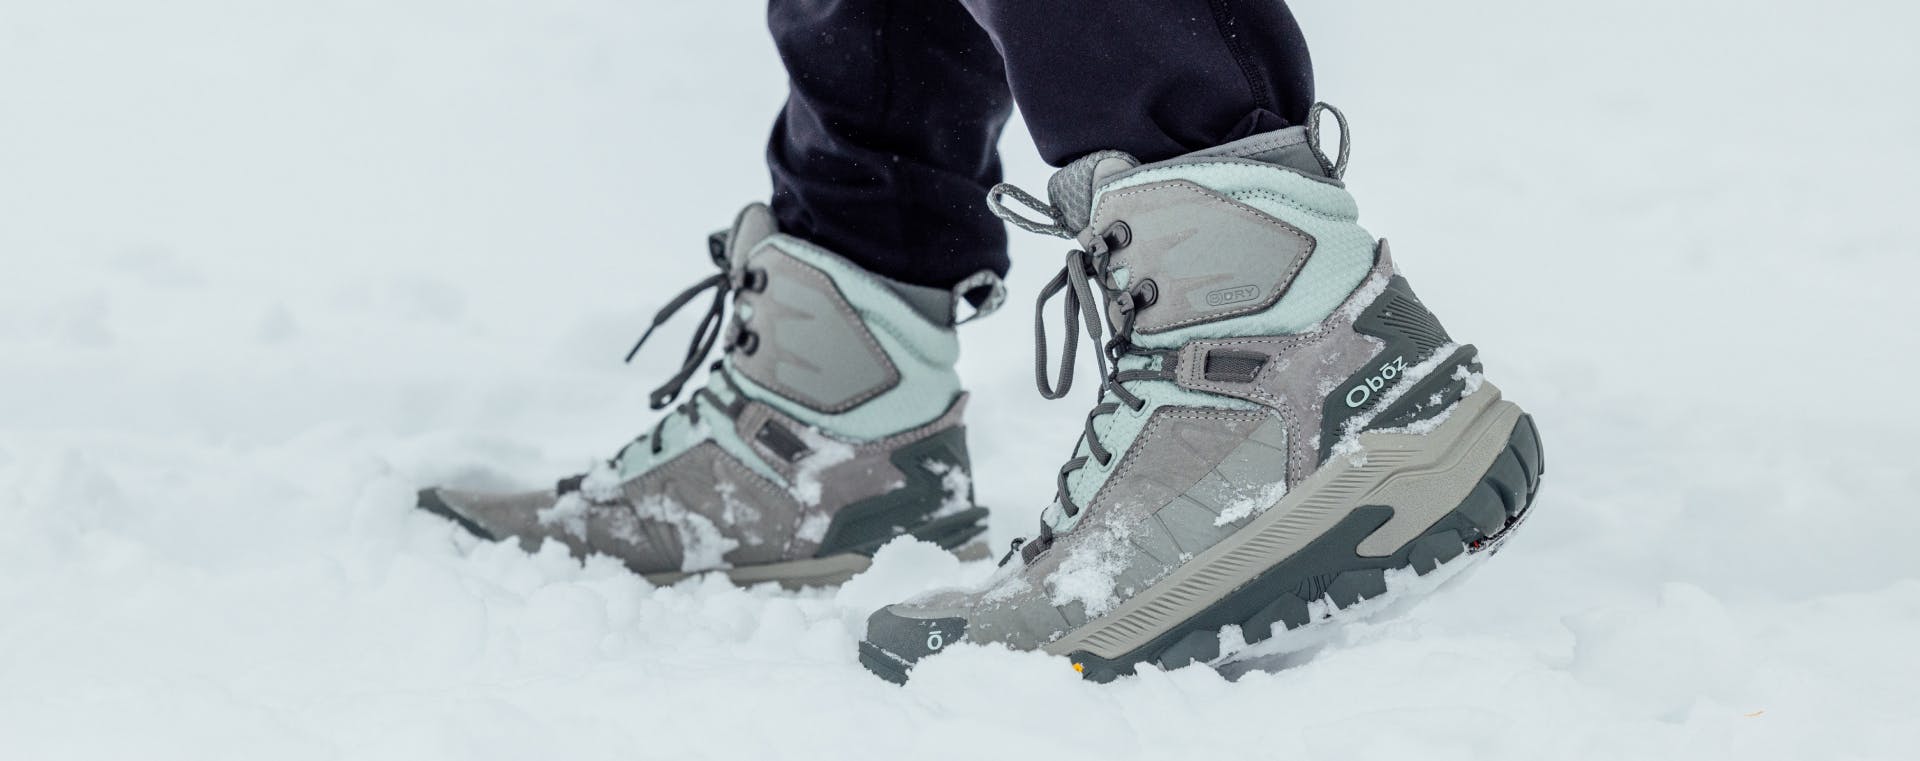 Choosing the Right Winter Boots  Care Instructions & Popular Brands